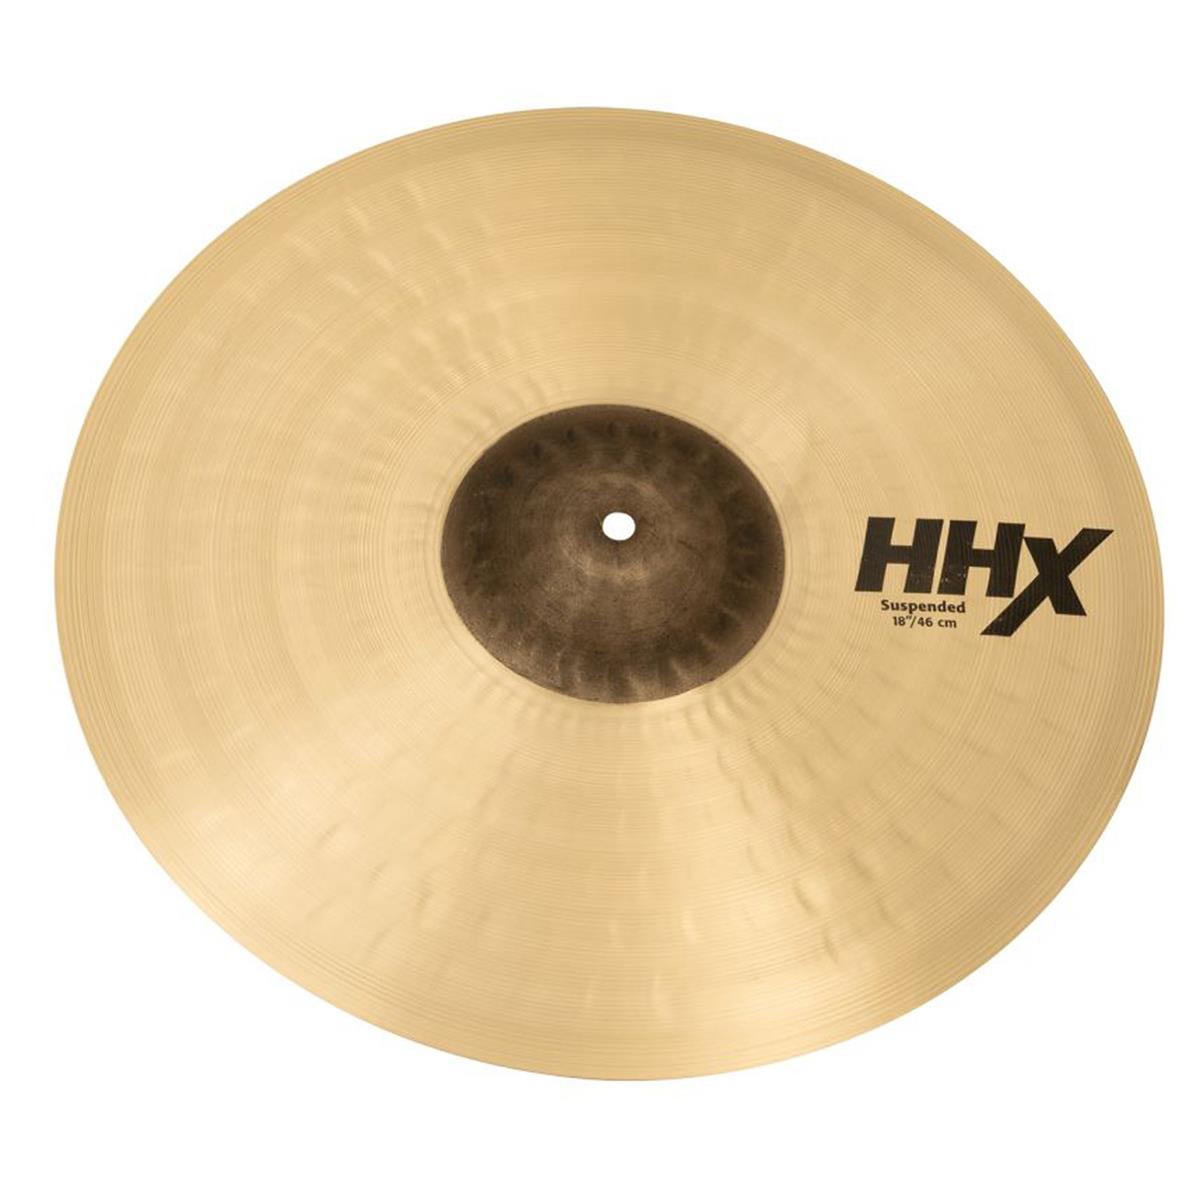 

Sabian 18" HHX Suspended Cymbal, Thin, Natural Finish